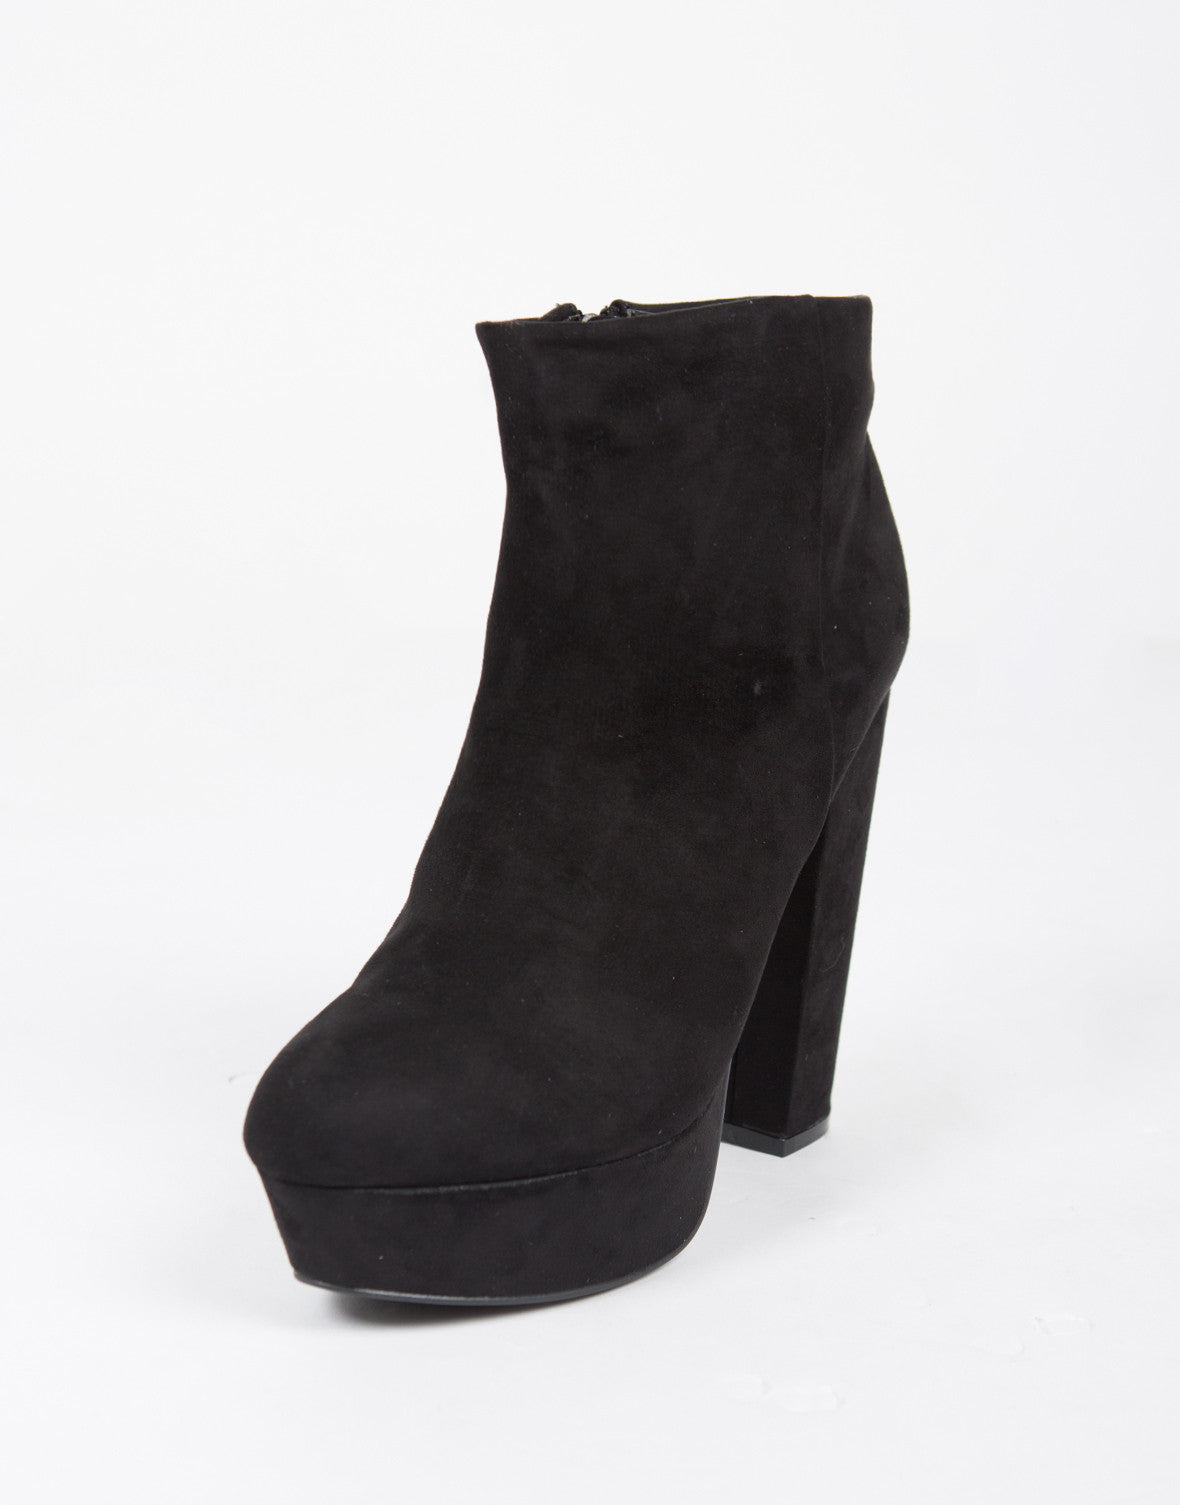 High Platform Suede Booties - Black Boots - Ankle Boots – Shoes – 2020AVE